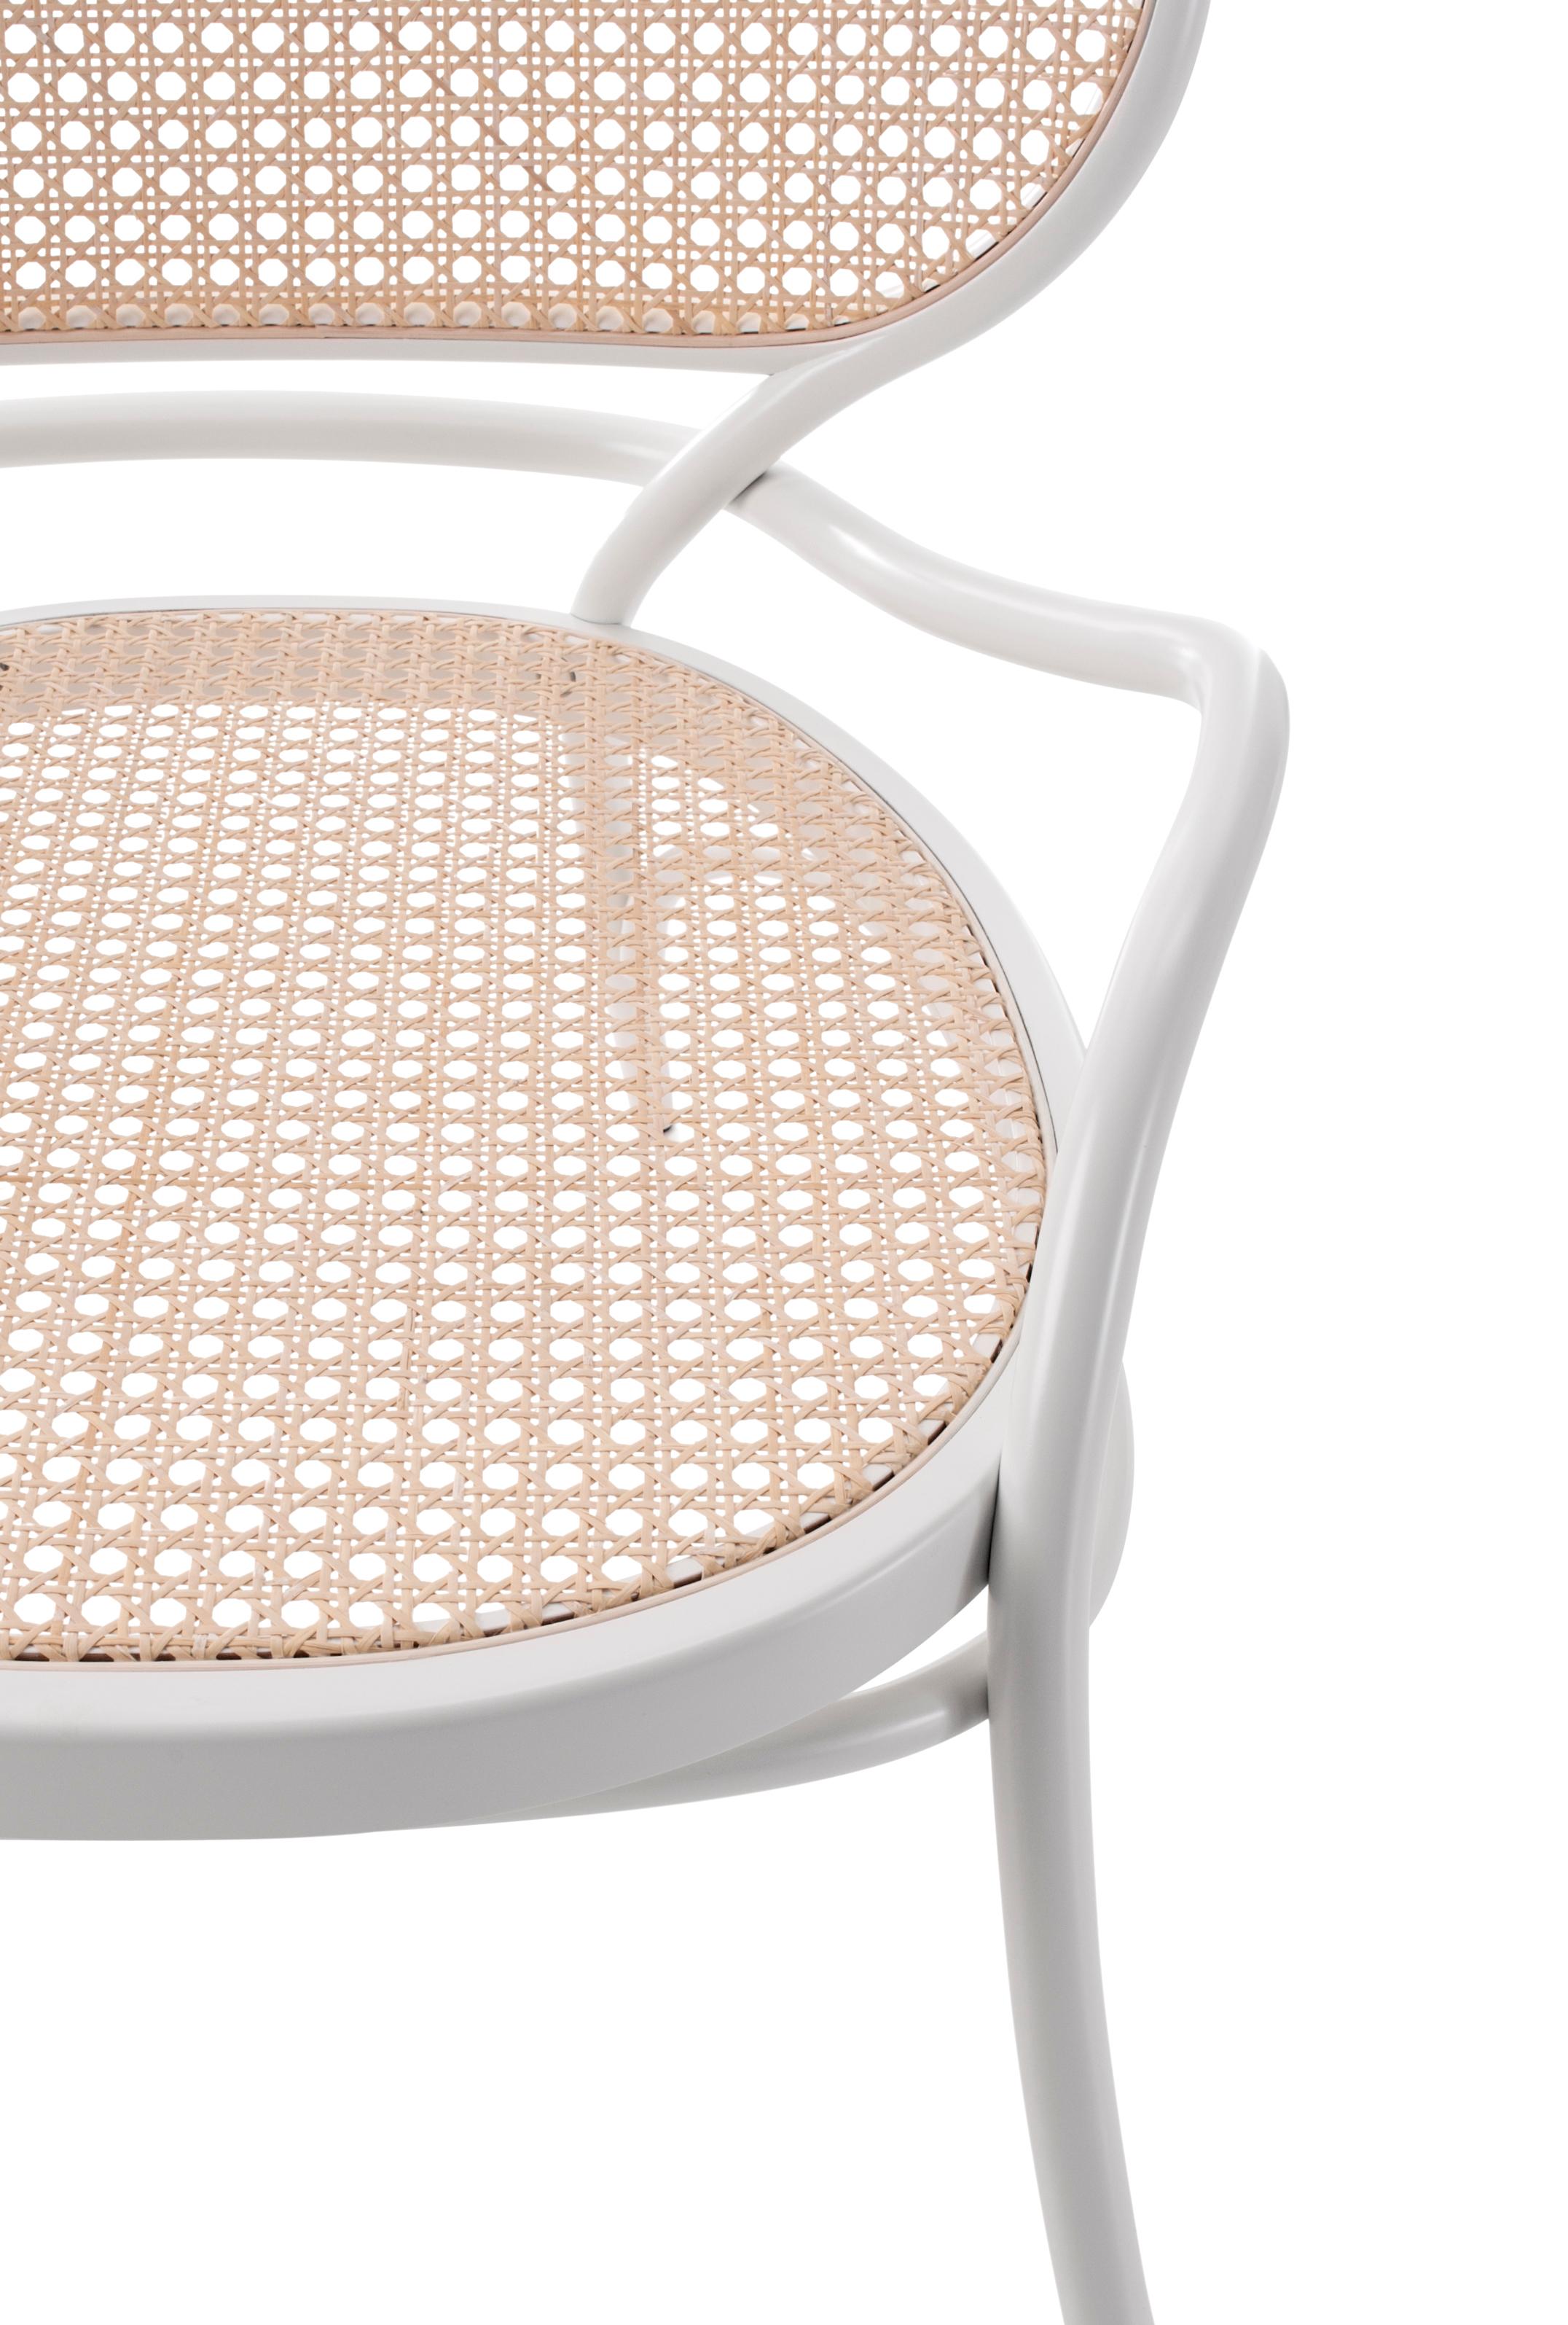 Nigel Coates has designed a sophisticated lounge chair with a complex design reflecting the stylistic features of the brand with refined skill. The seat and the comfortable backrest made of woven cane with a special large mesh version, are defined